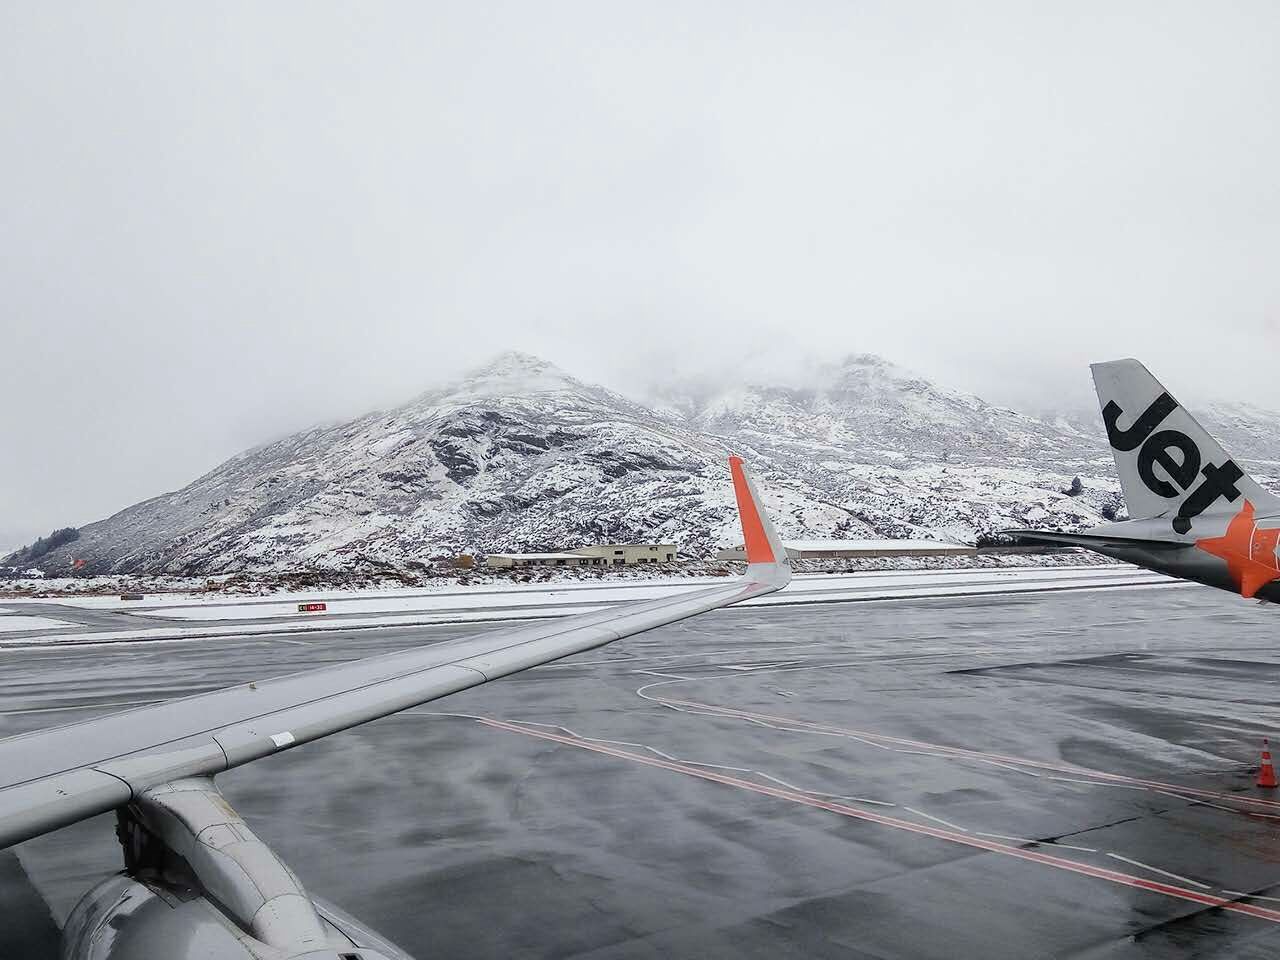 Snow tonight? Well, it was like a Queenstown ski season at the Queenstown airport. 